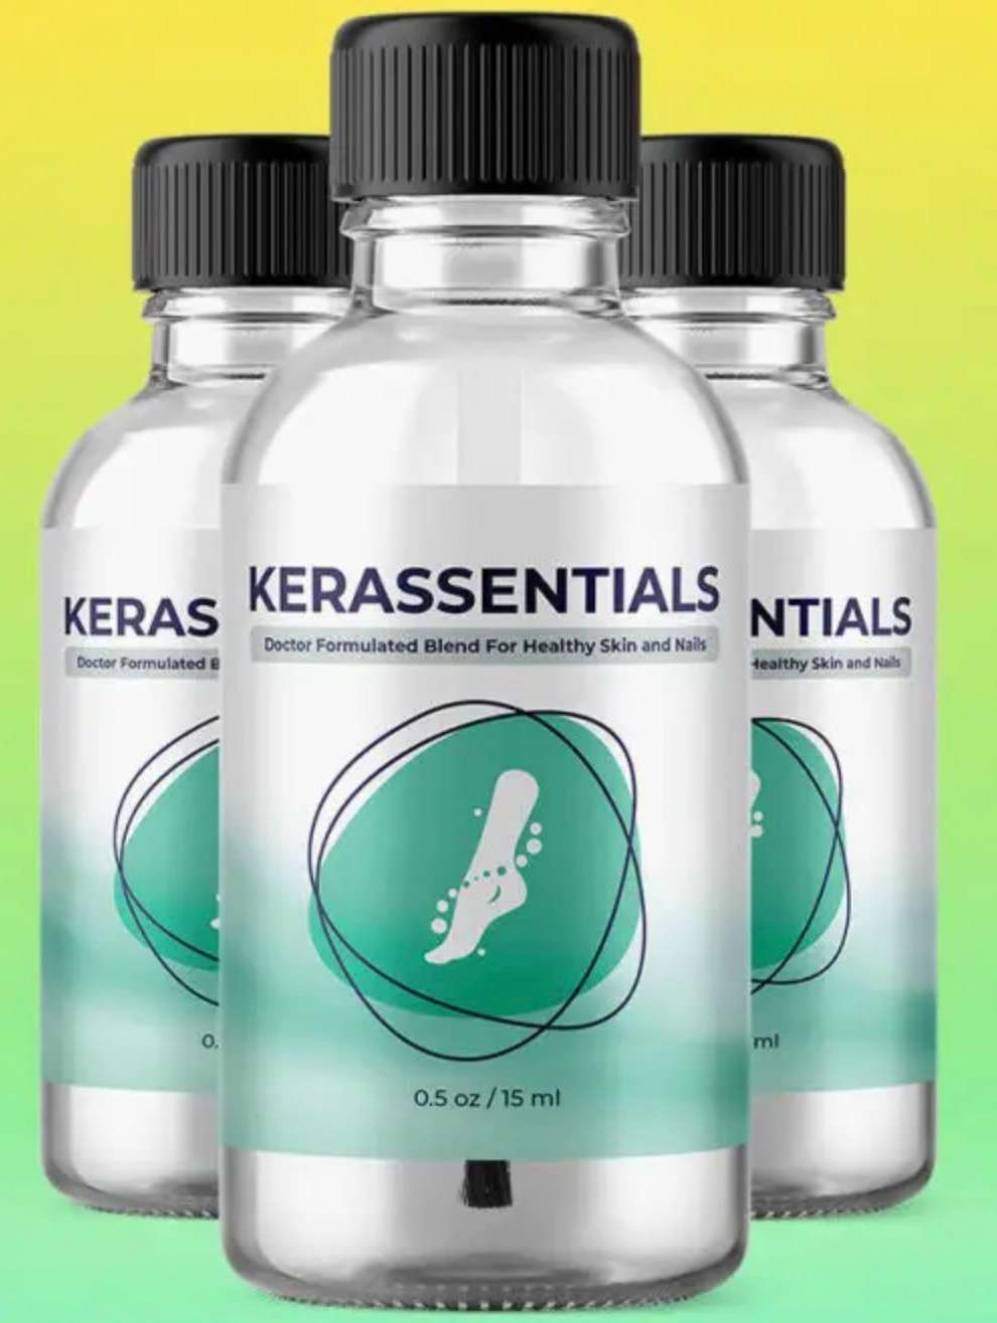 How Has Kerassentials Worked For You